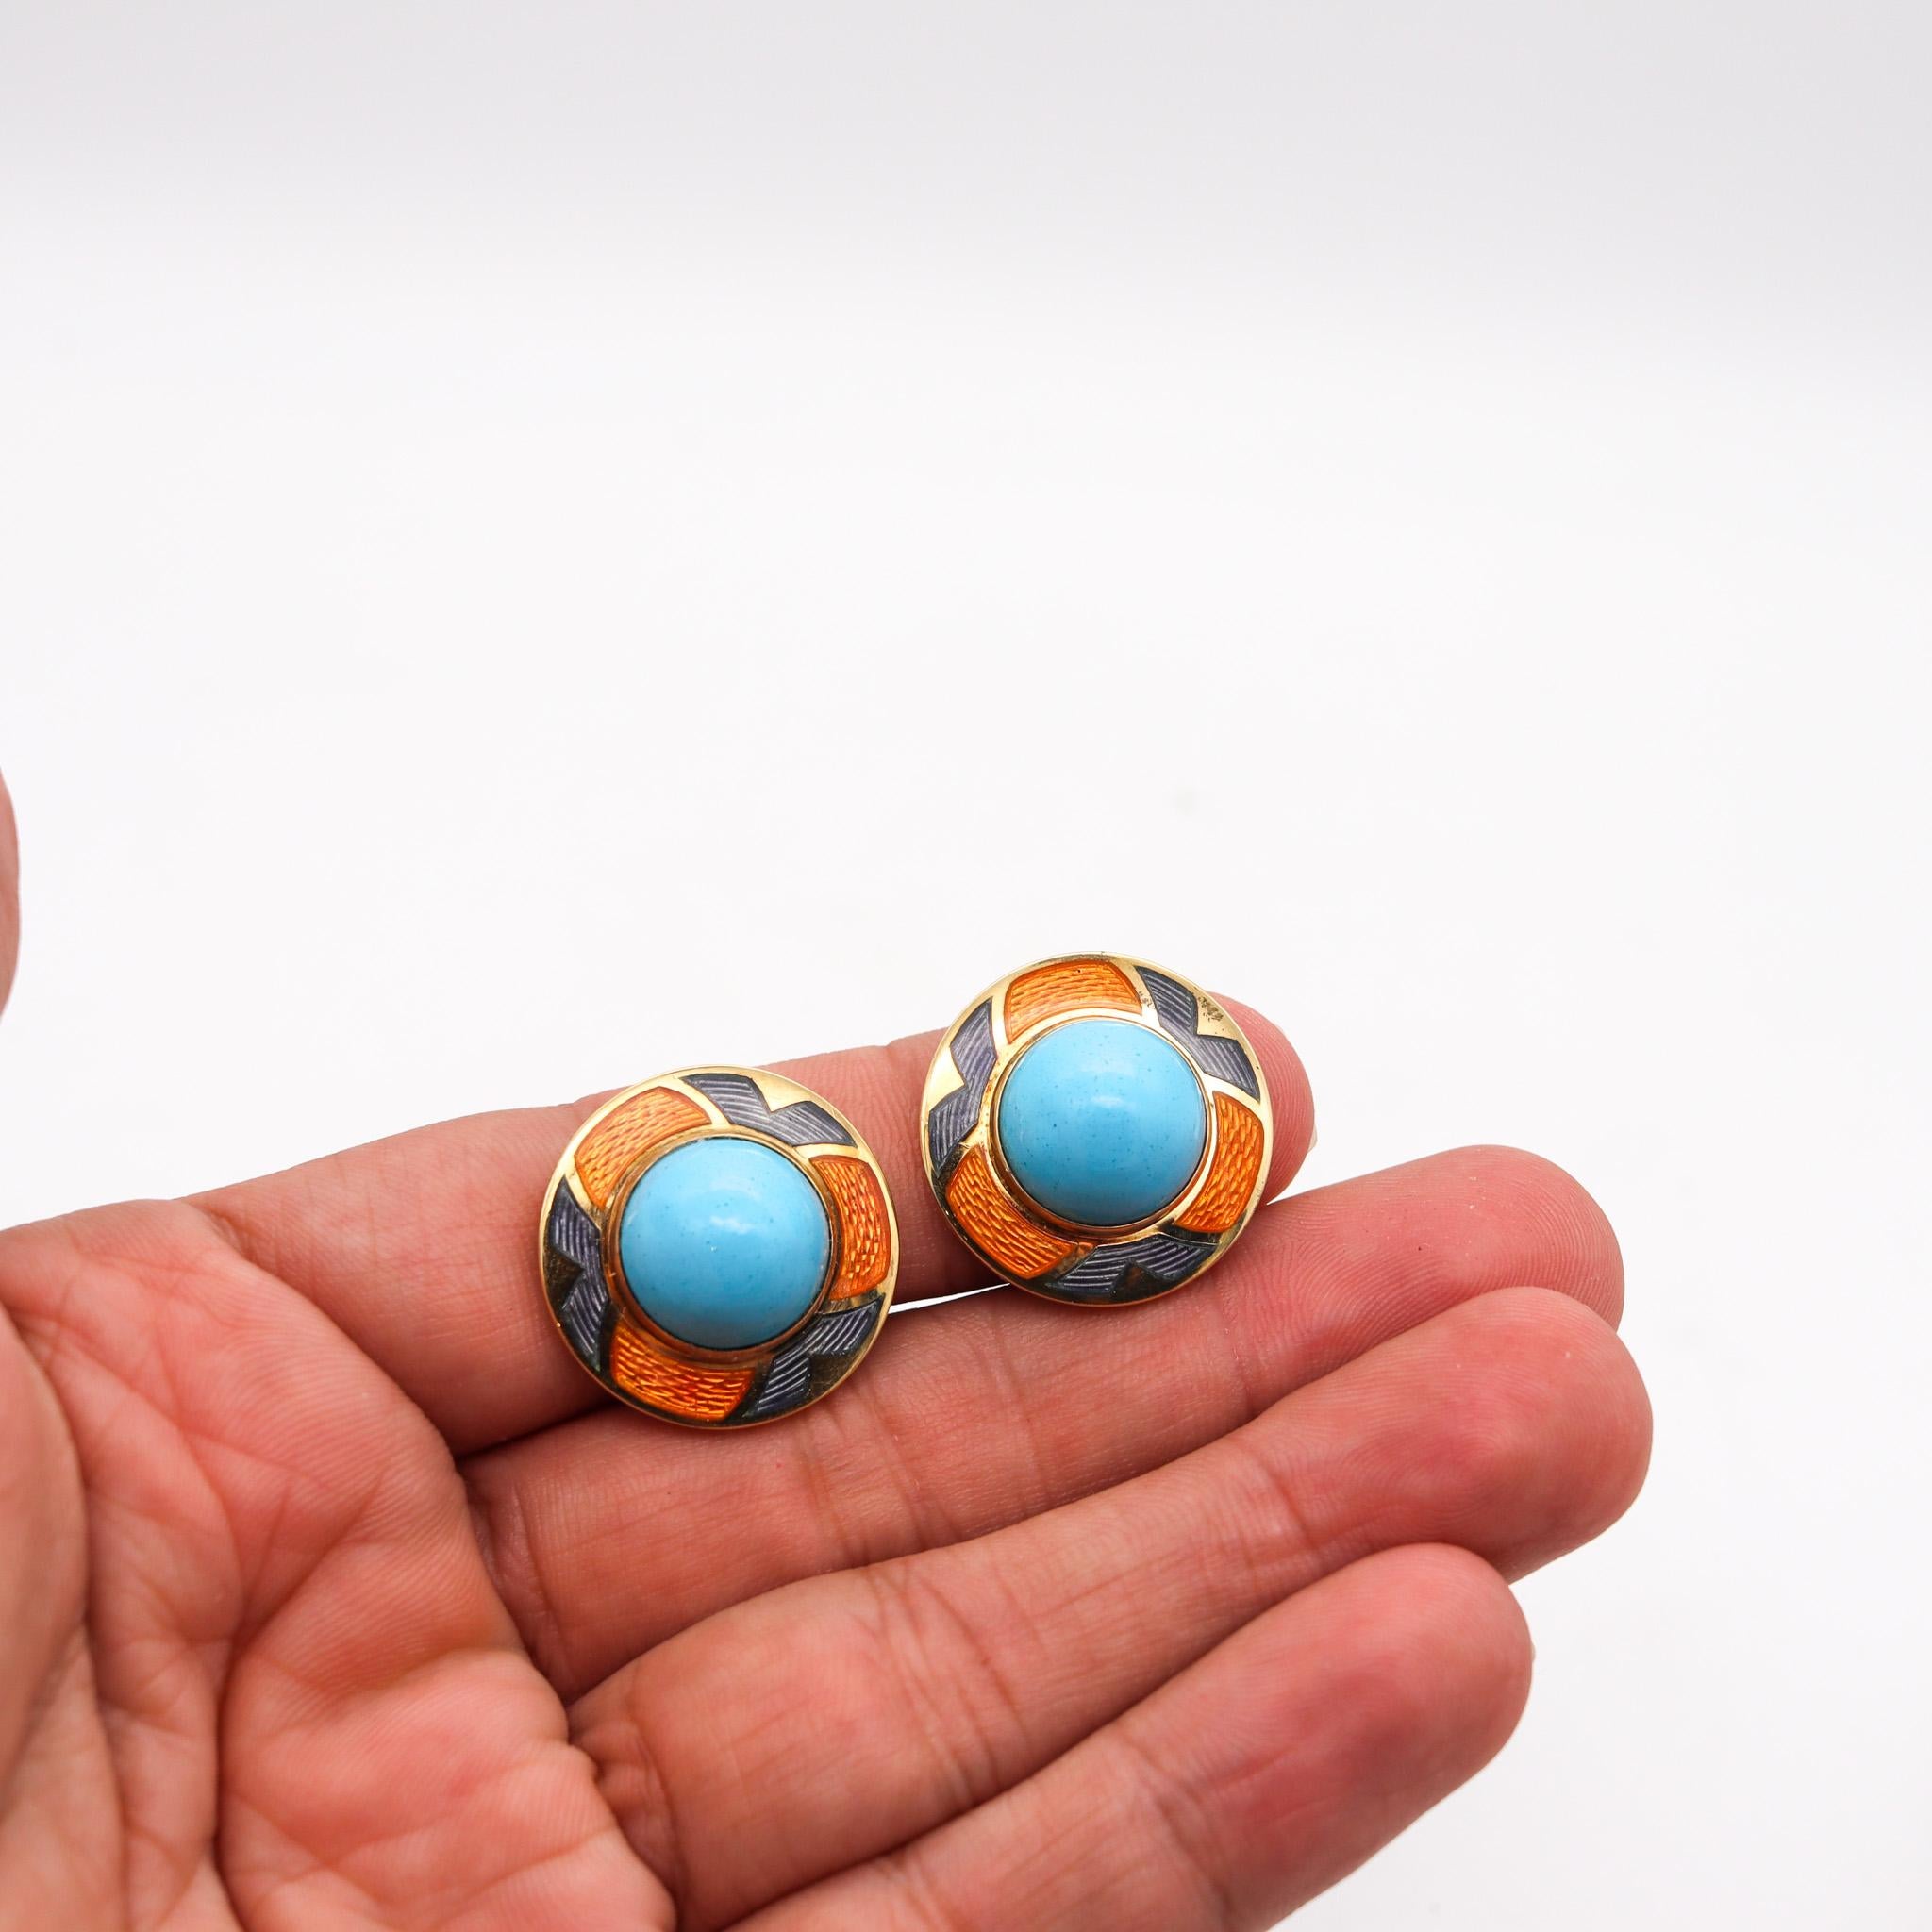 Leo De Vroomen London Enameled Earrings in 18k Yellow Gold and Turquoises In Excellent Condition For Sale In Miami, FL